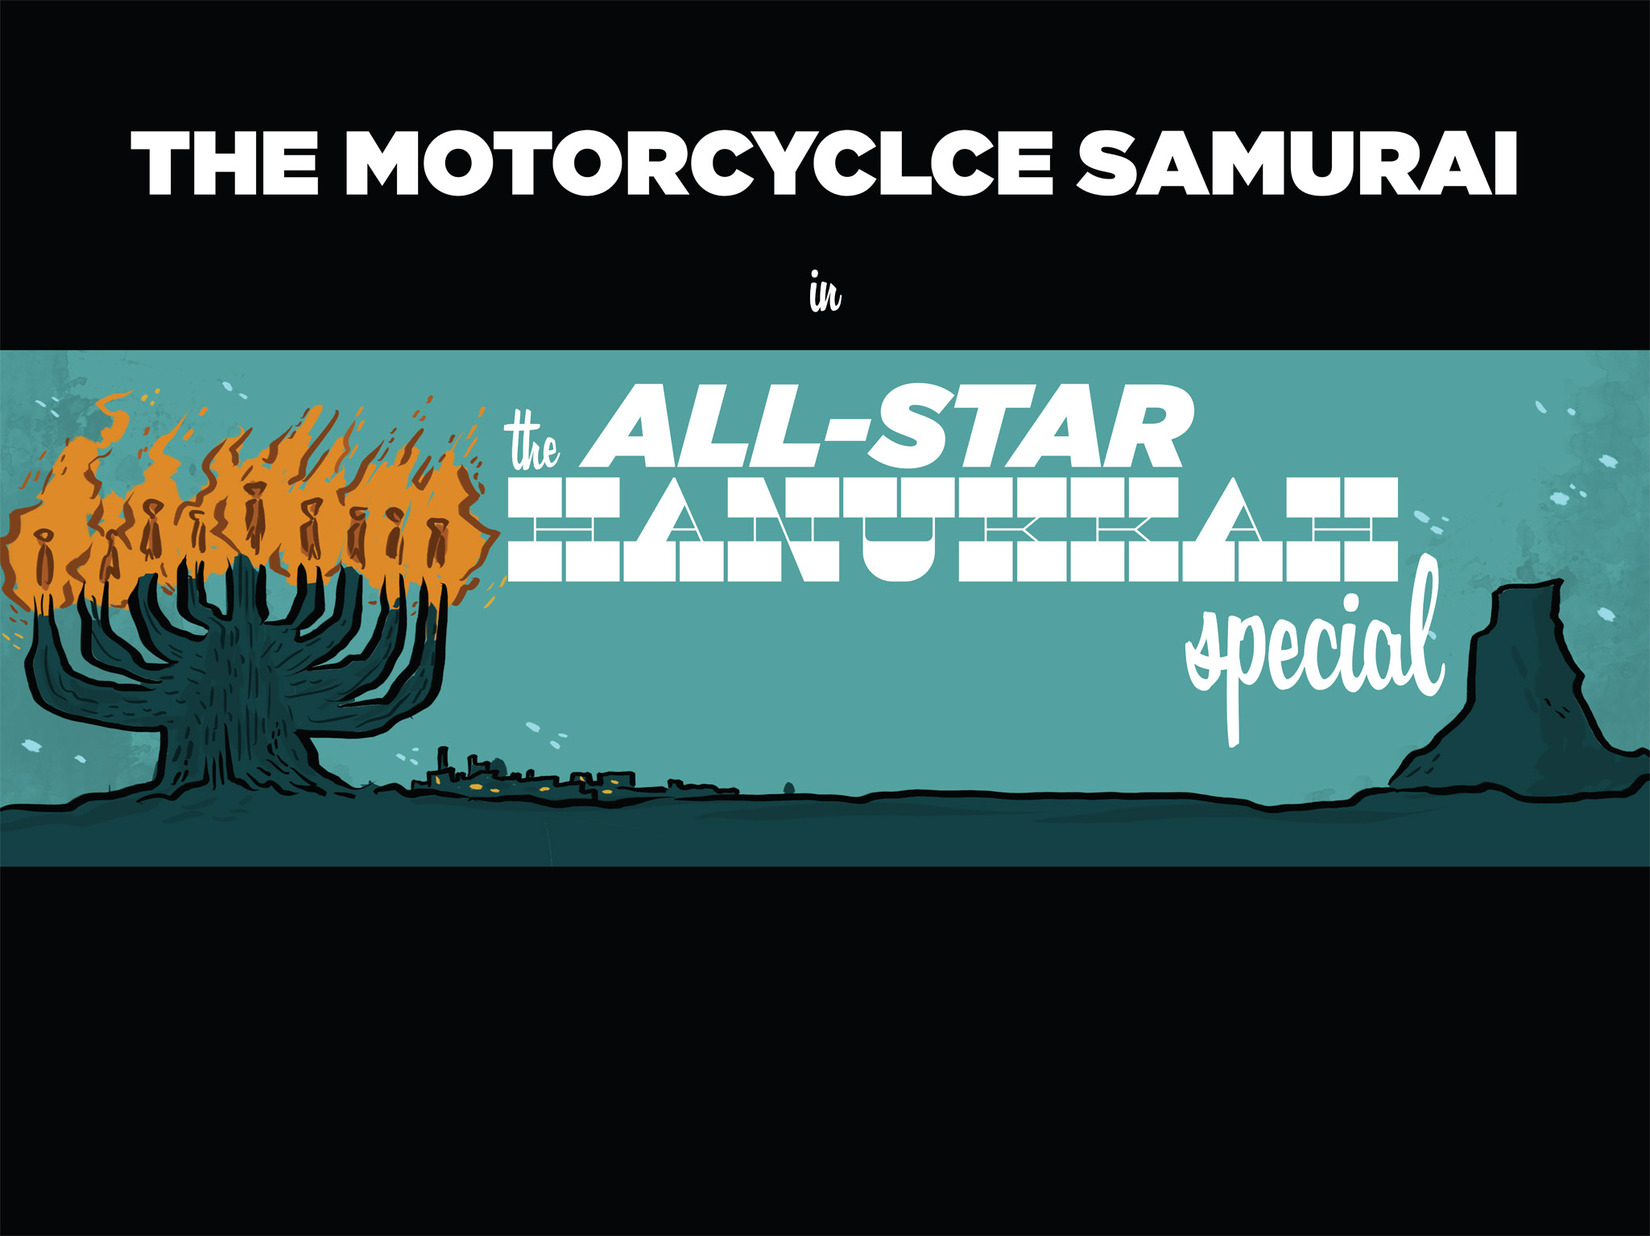 Read online The Motorcycle Samurai: The All-Star Hanukkah Special comic -  Issue # Full - 3